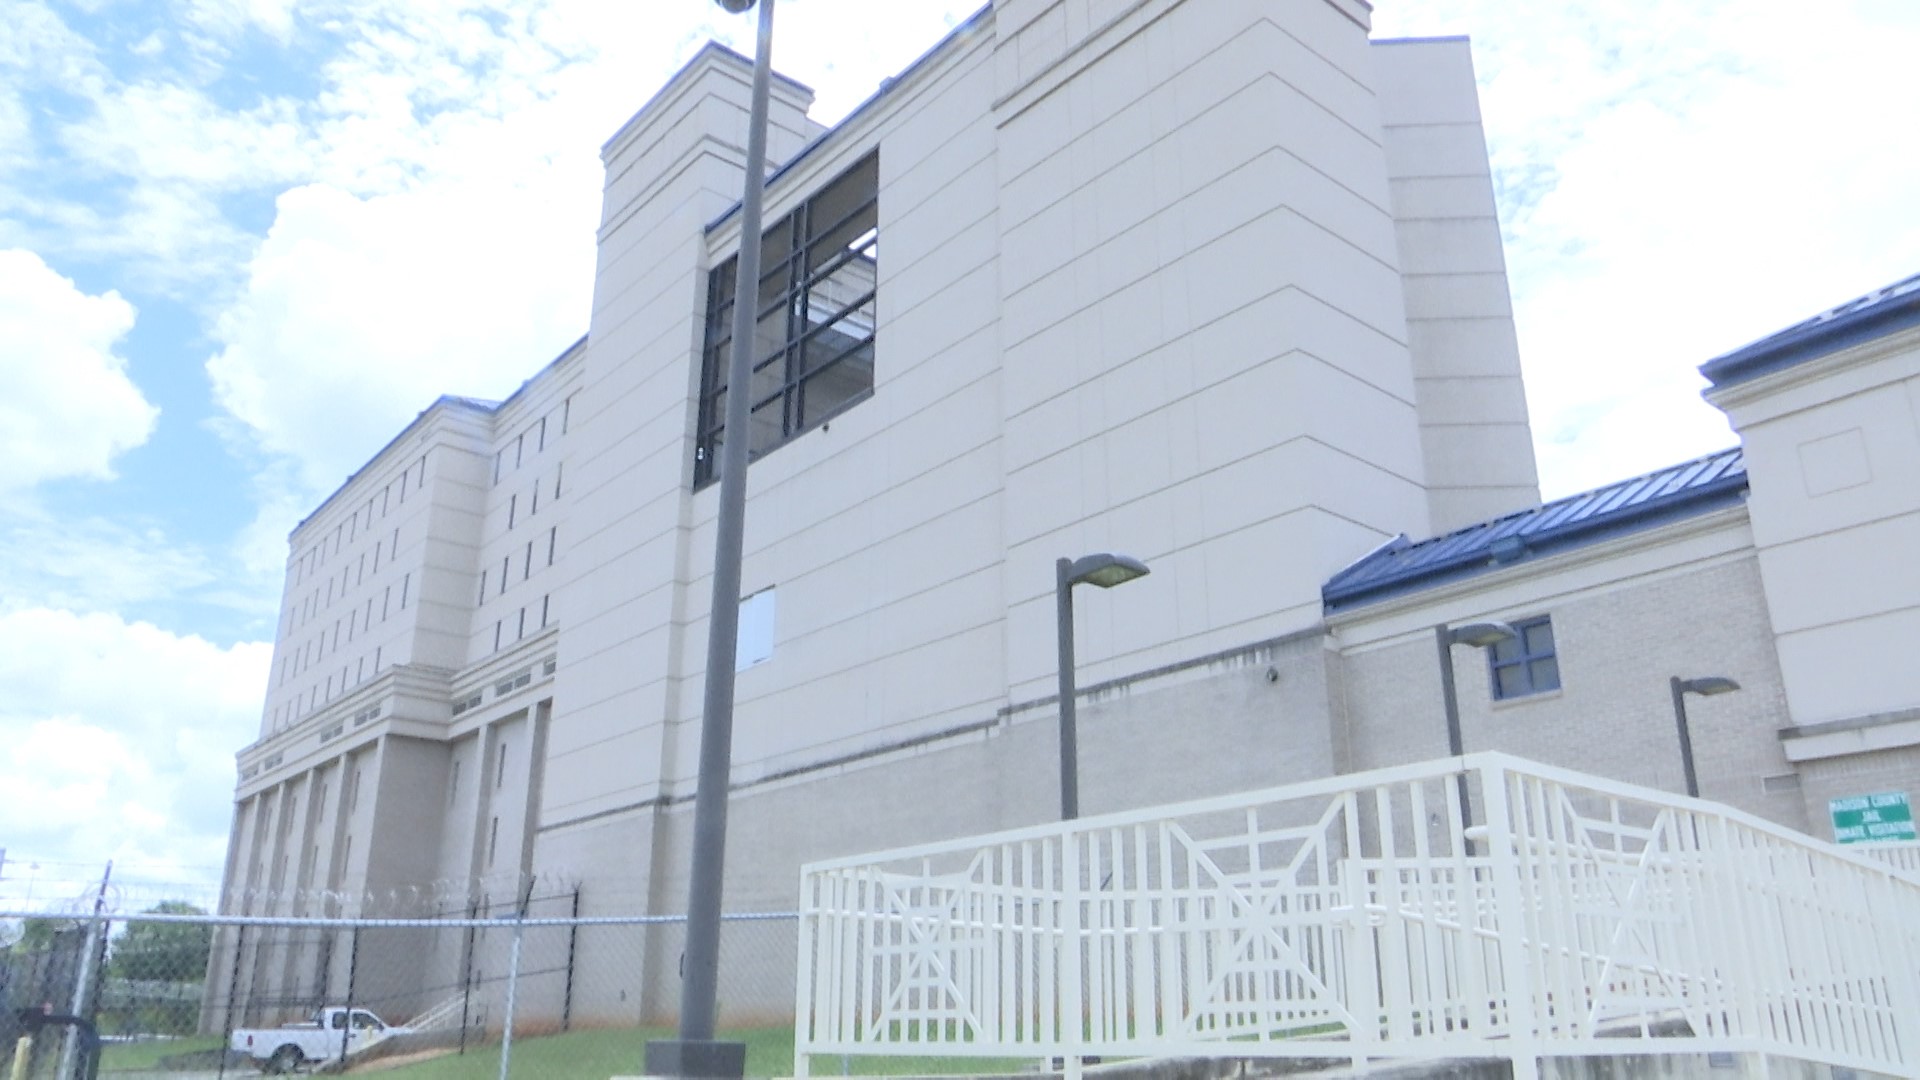 Inmate mail at the Madison County Jail will soon be digitized in an effort to reduce contraband coming into the jail.